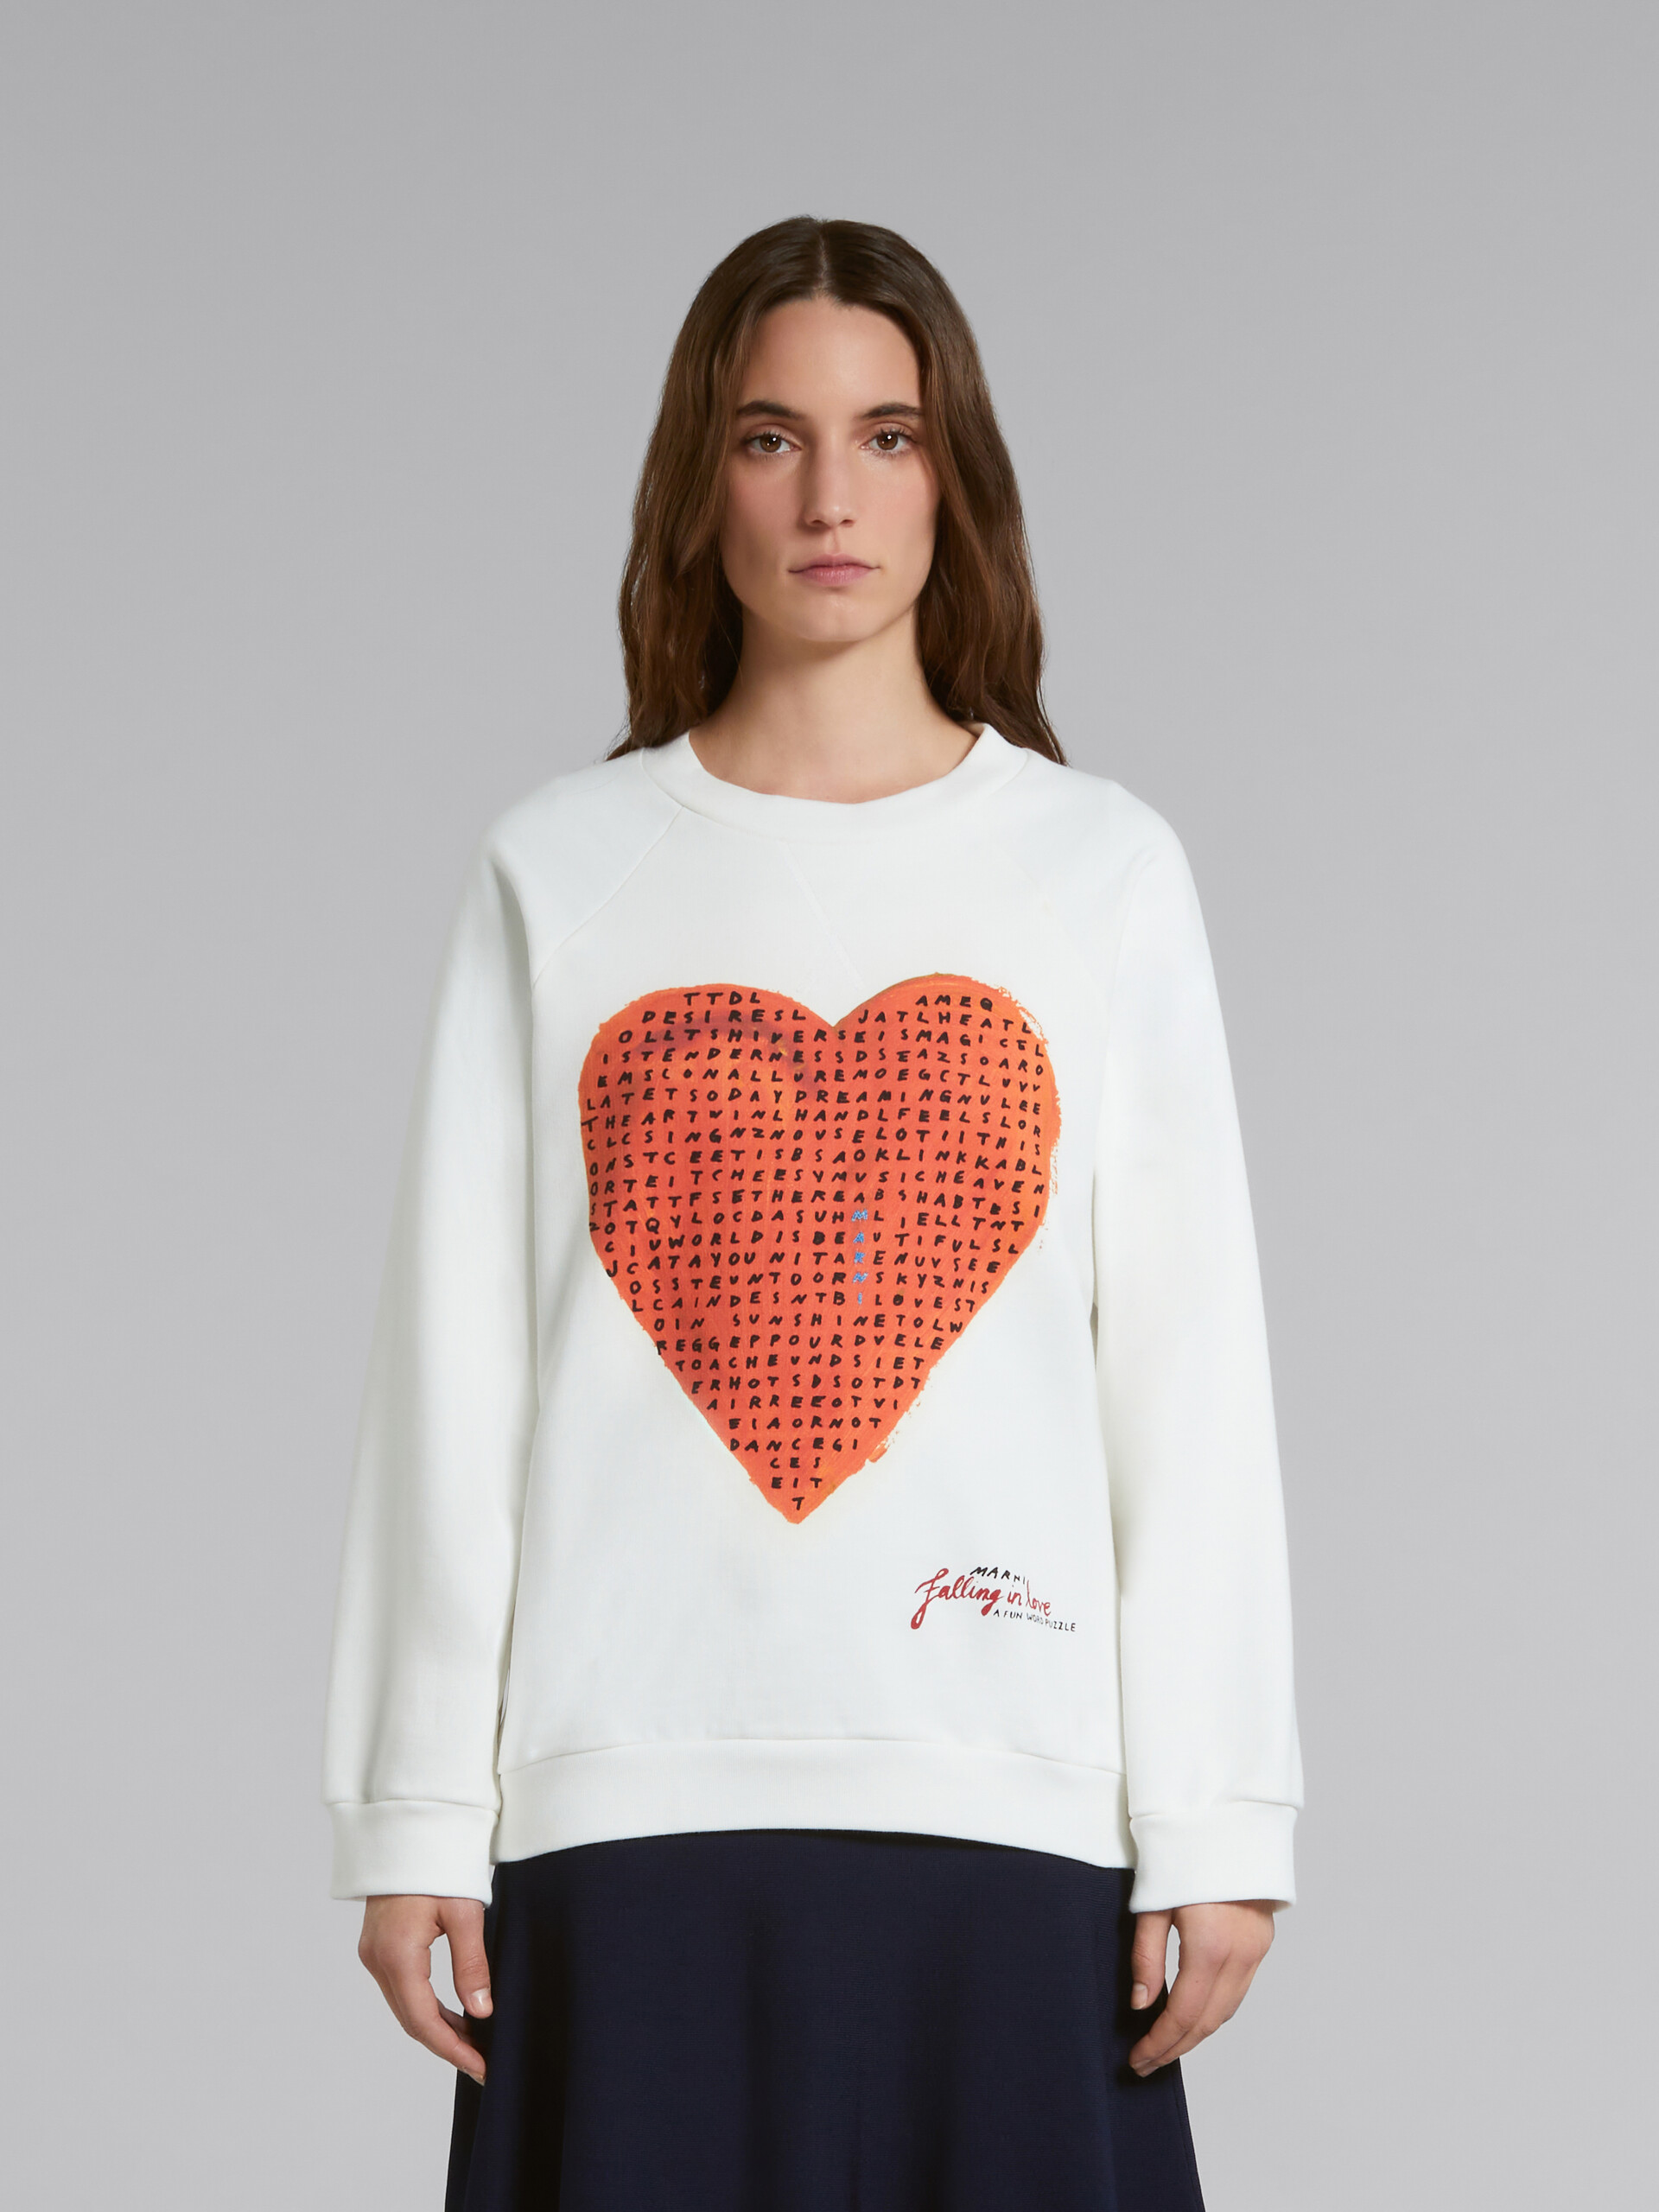 White sweatshirt with wordsearch heart print - Sweaters - Image 2